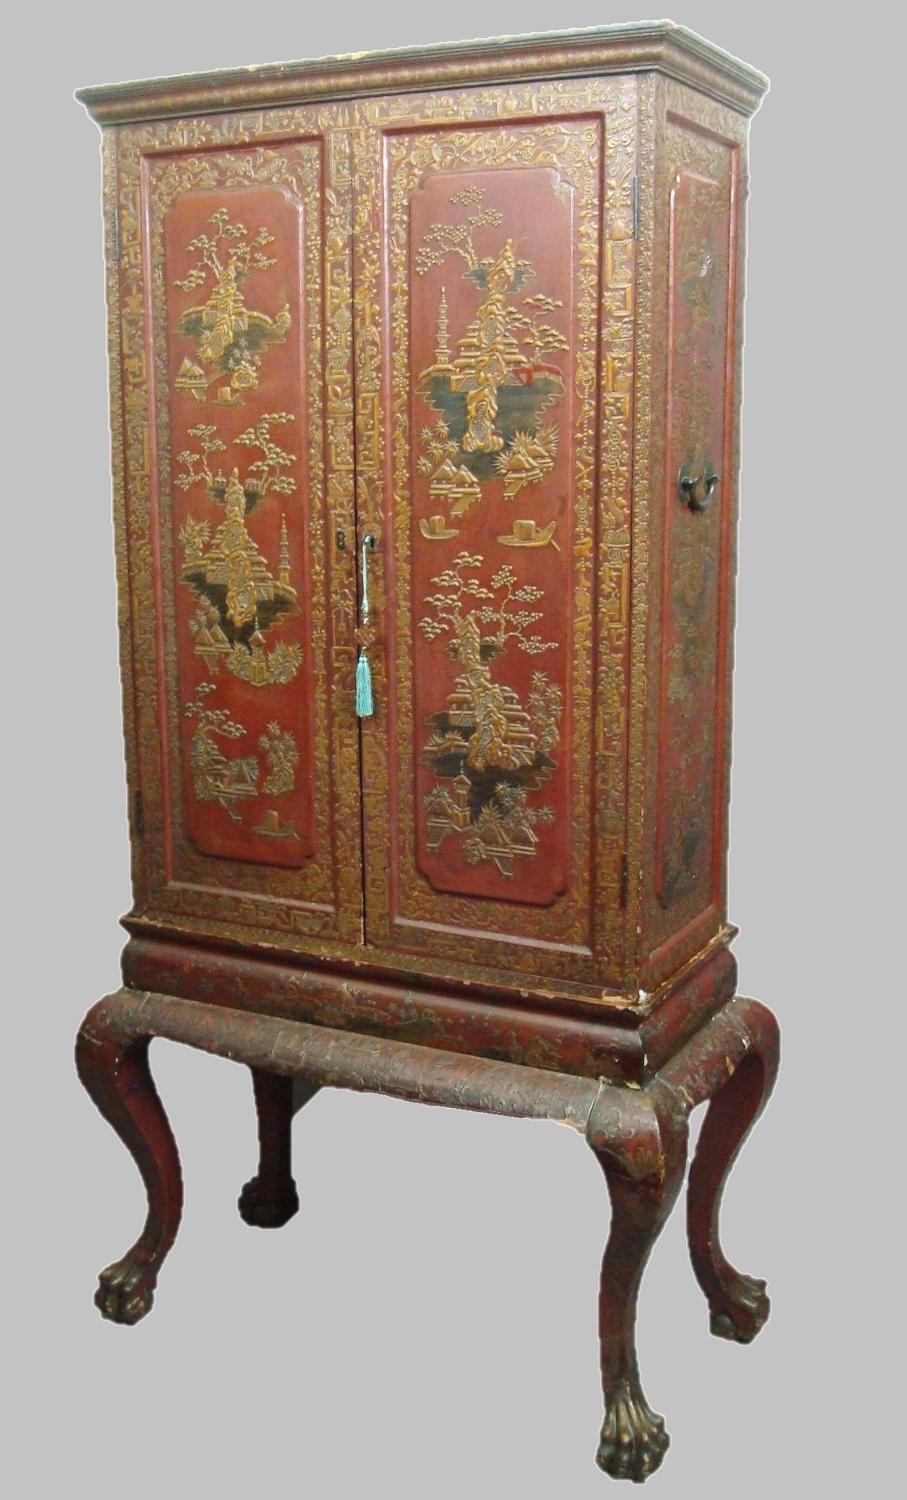 C18th Chinese red lacquer cabinet on stand